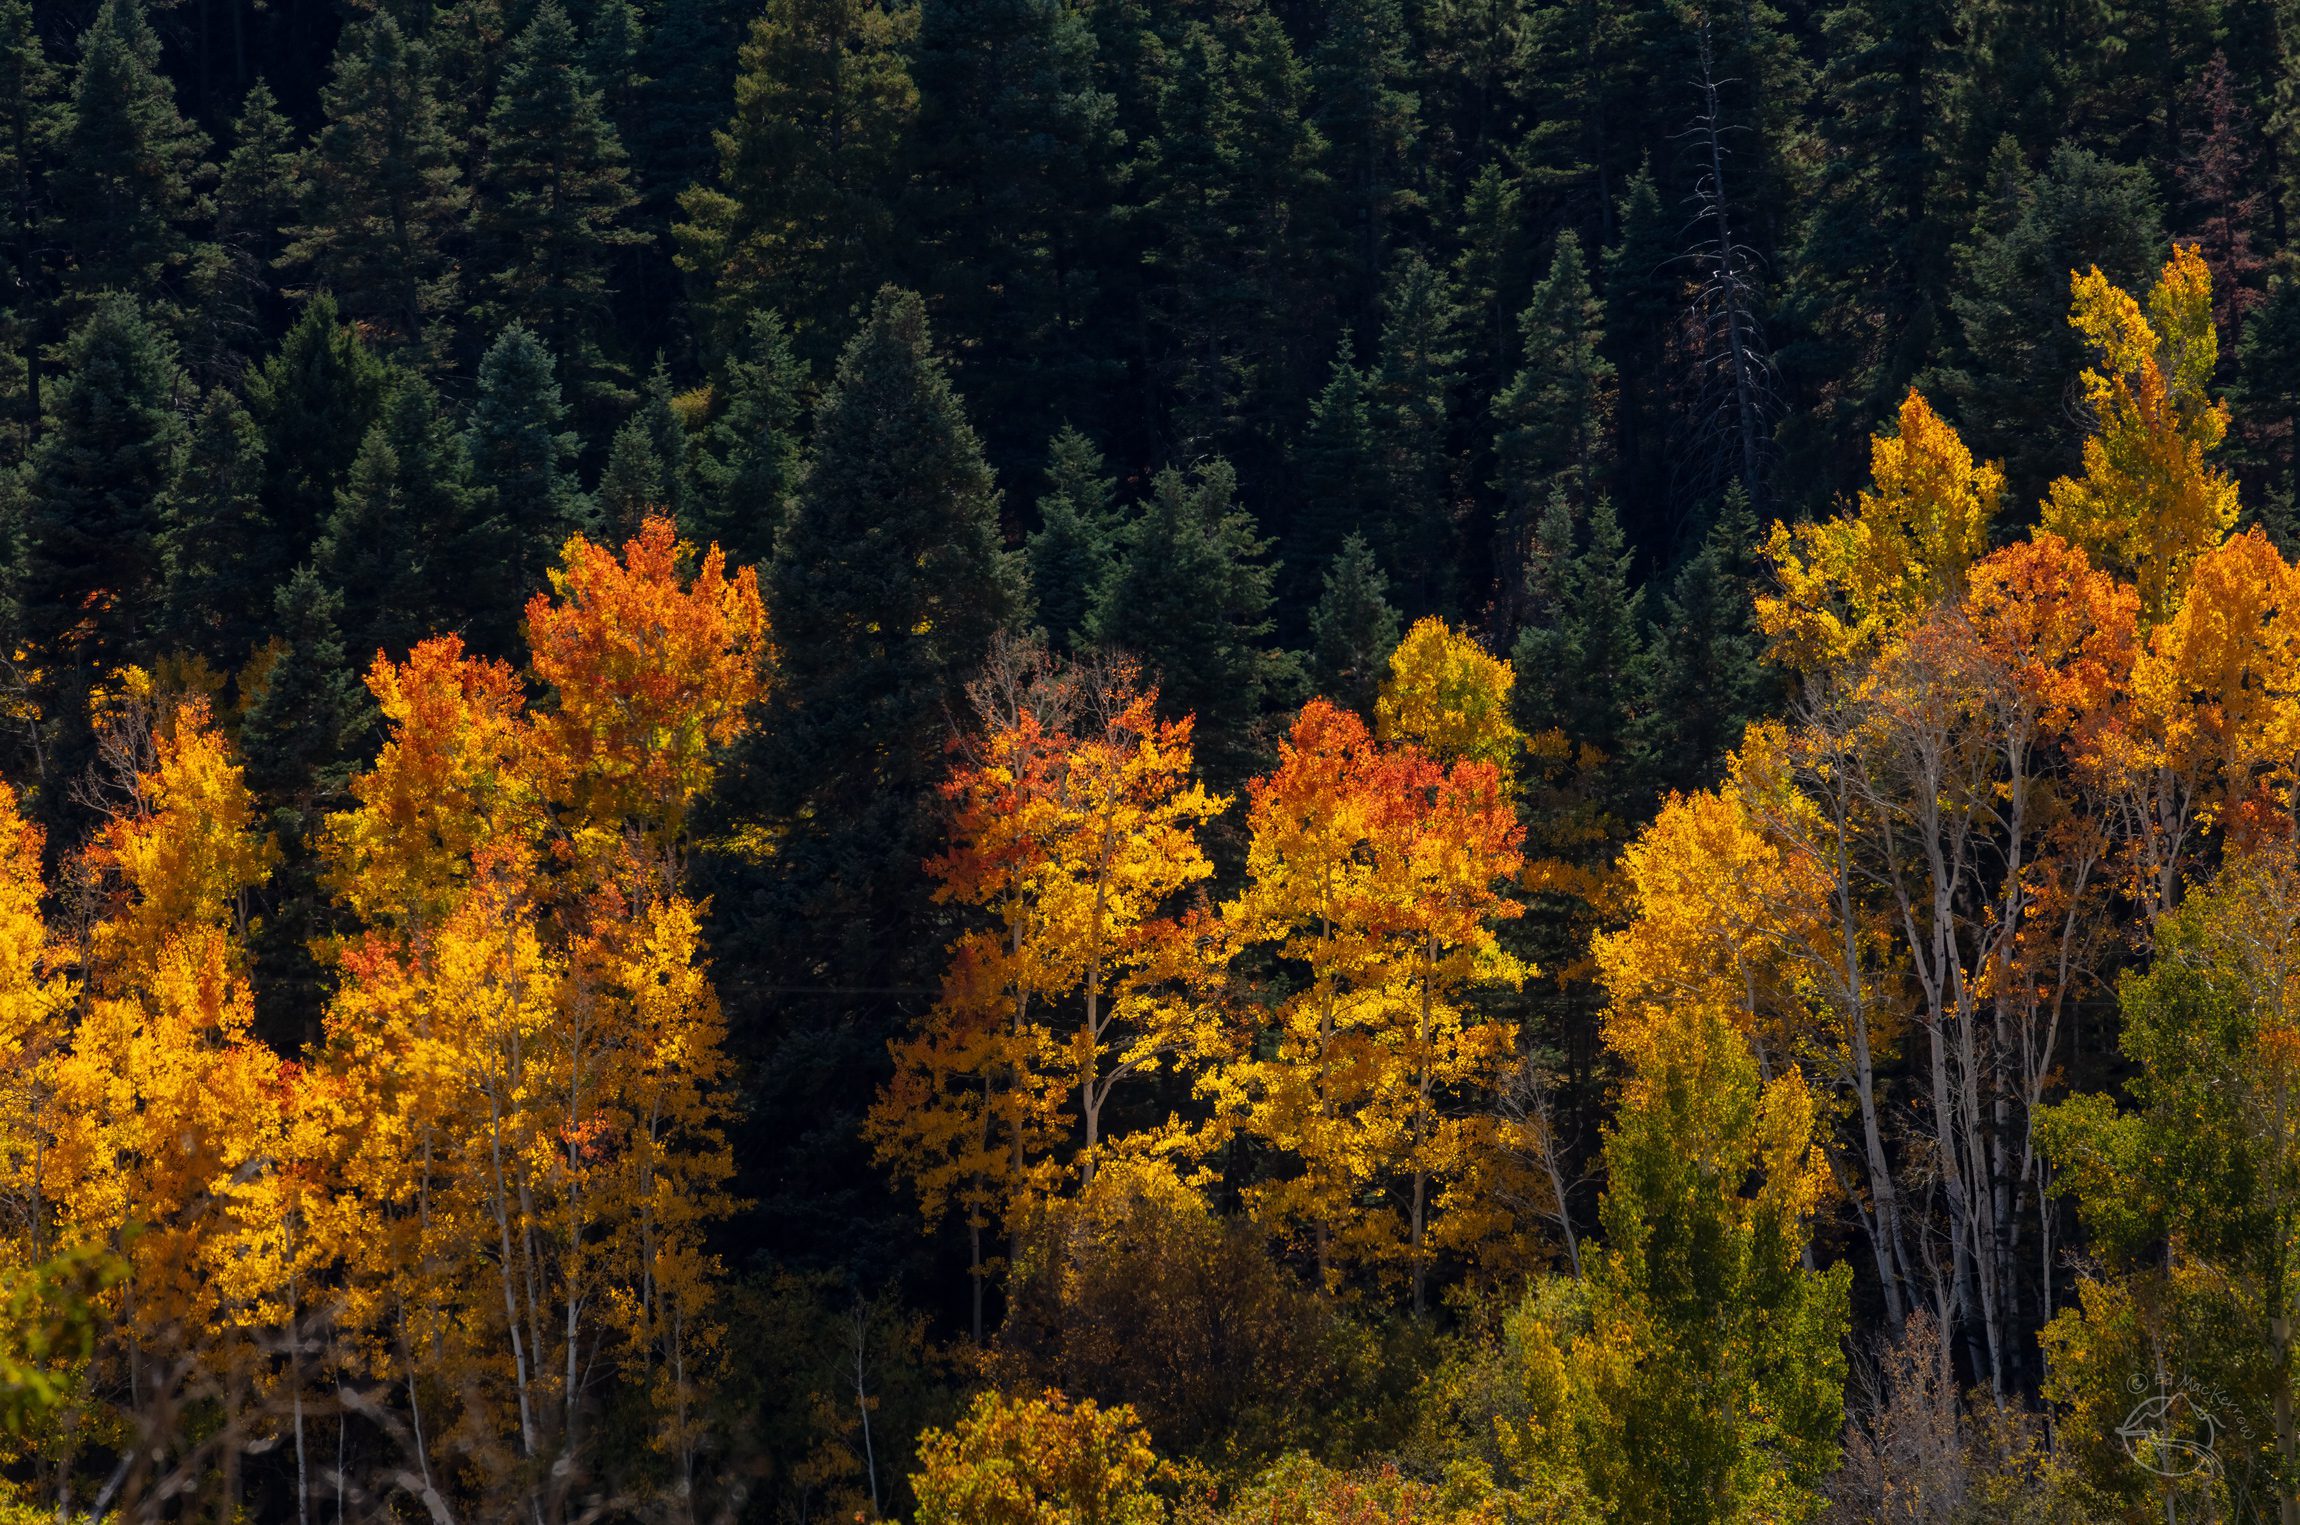 Red aspen trees in a New Mexico forest.